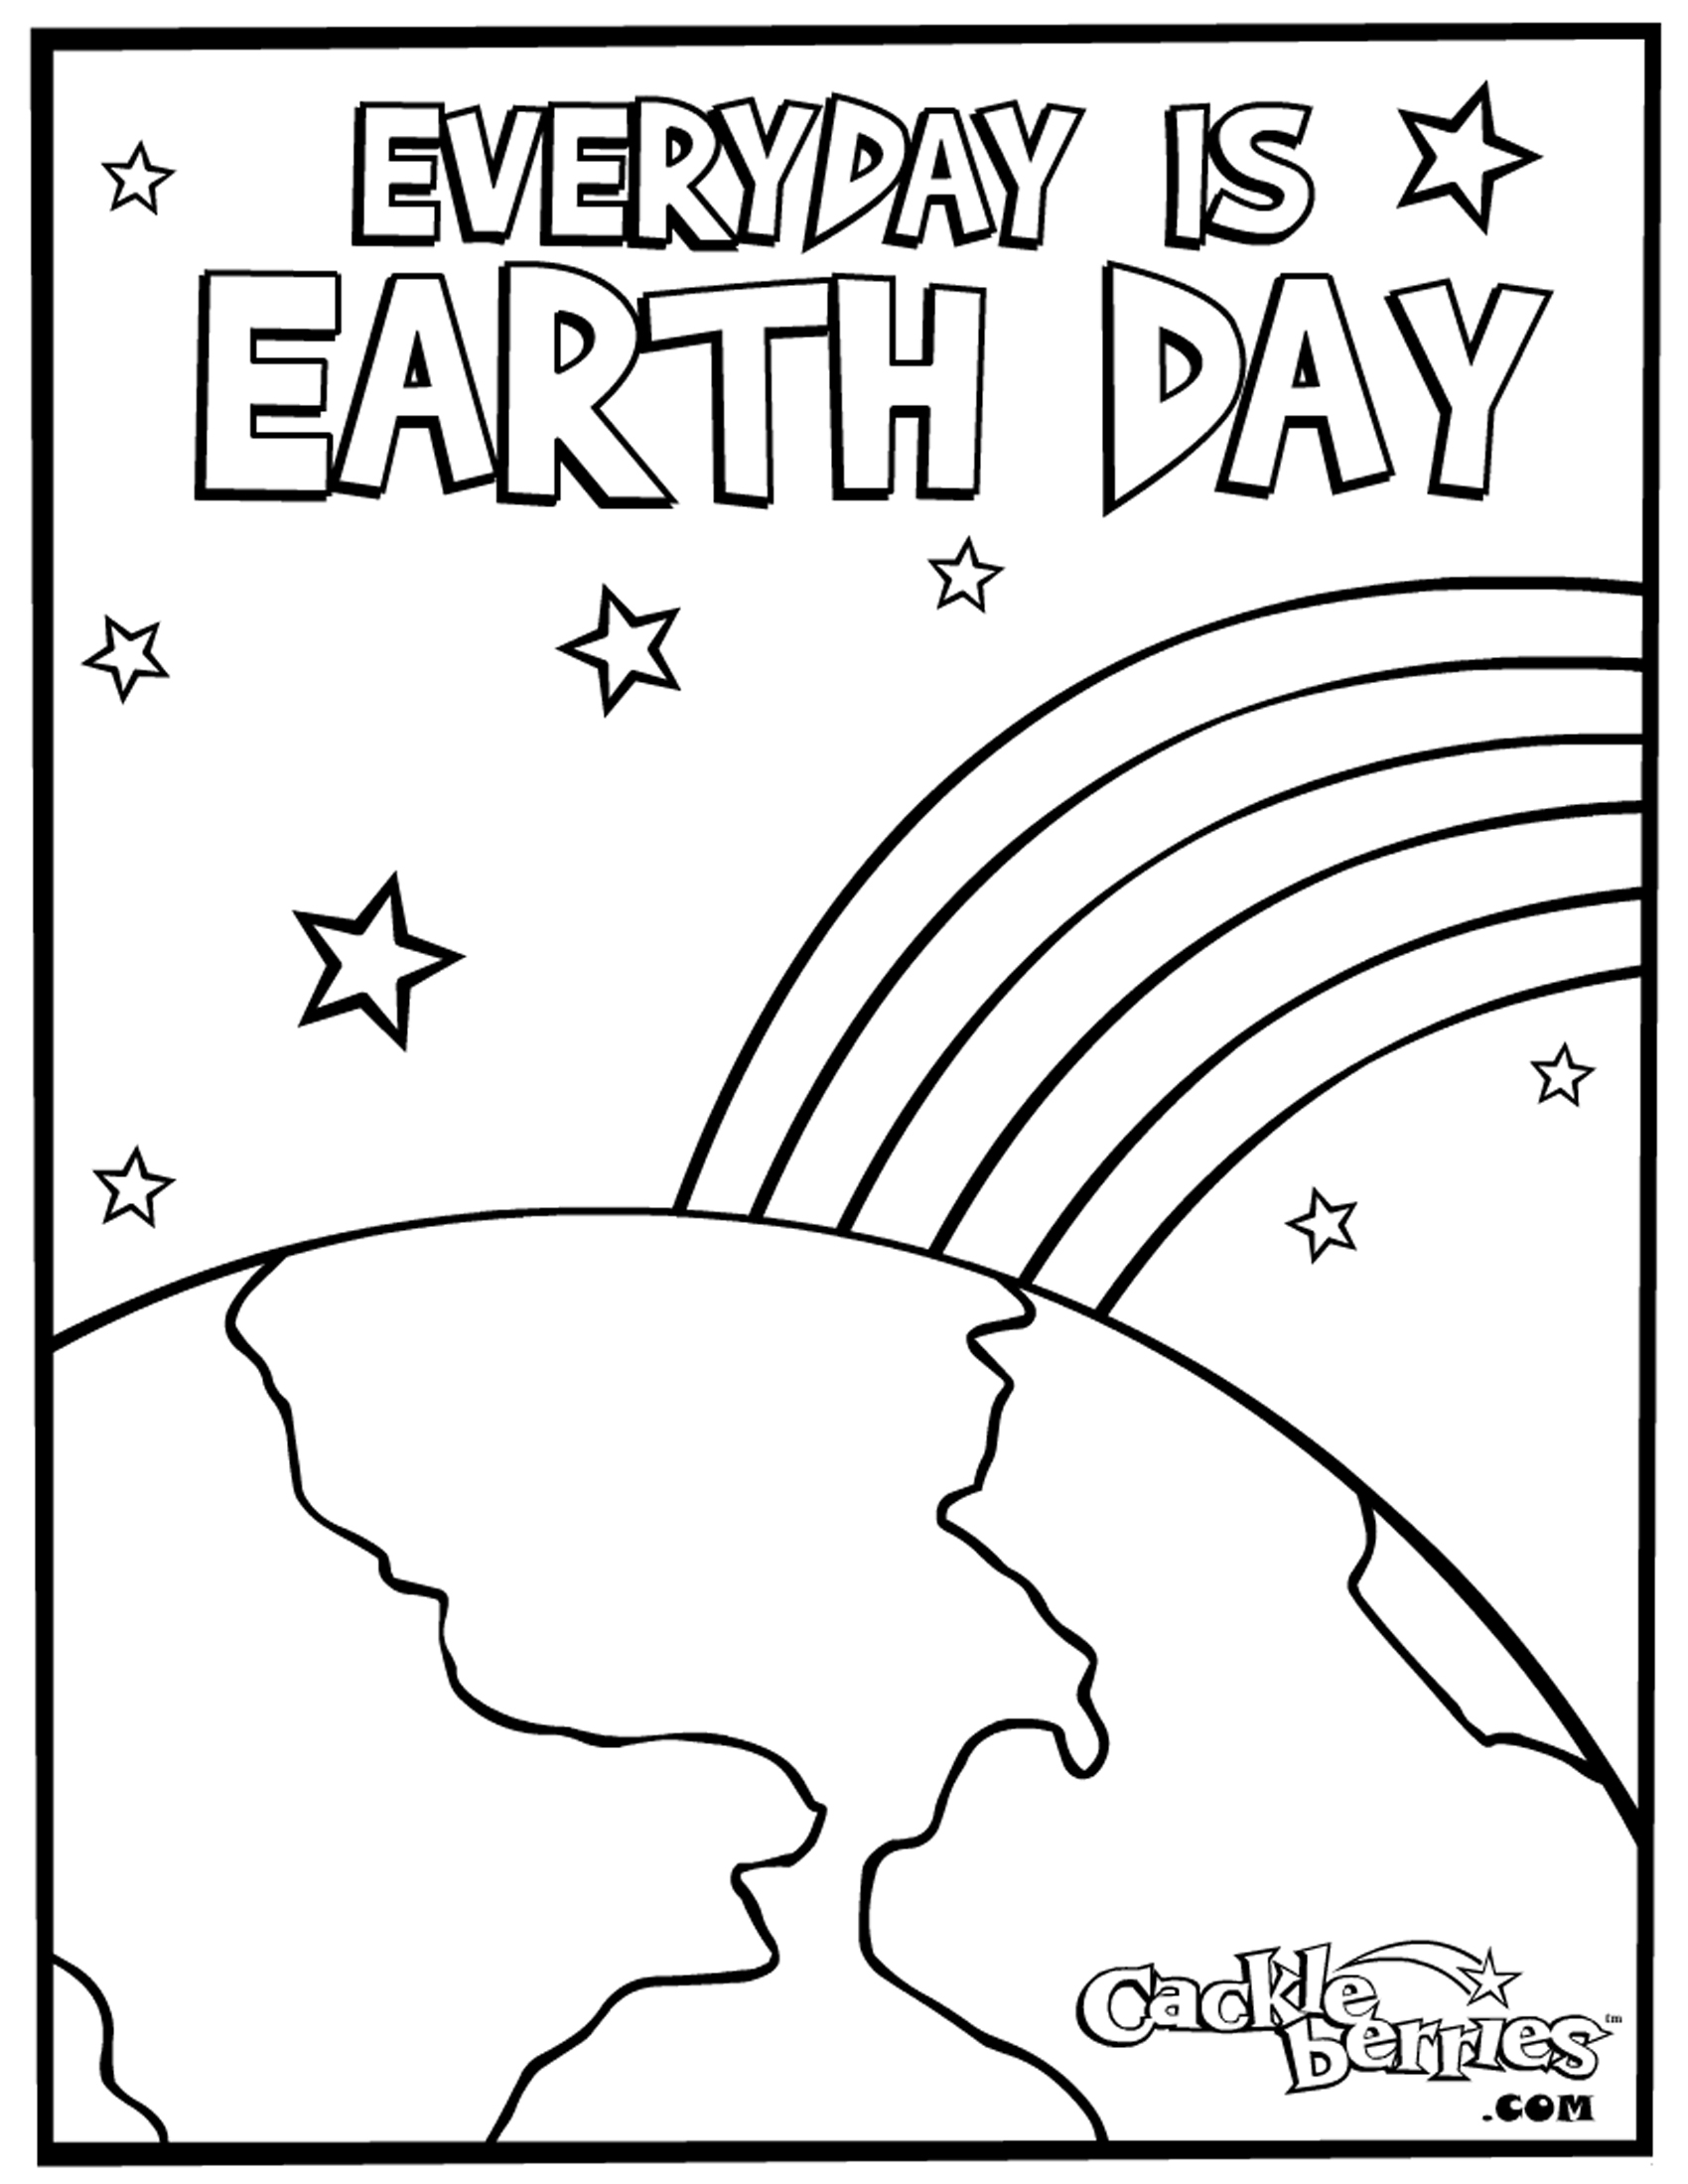 Earth Day Coloring Pages Pdf at GetDrawings Free download